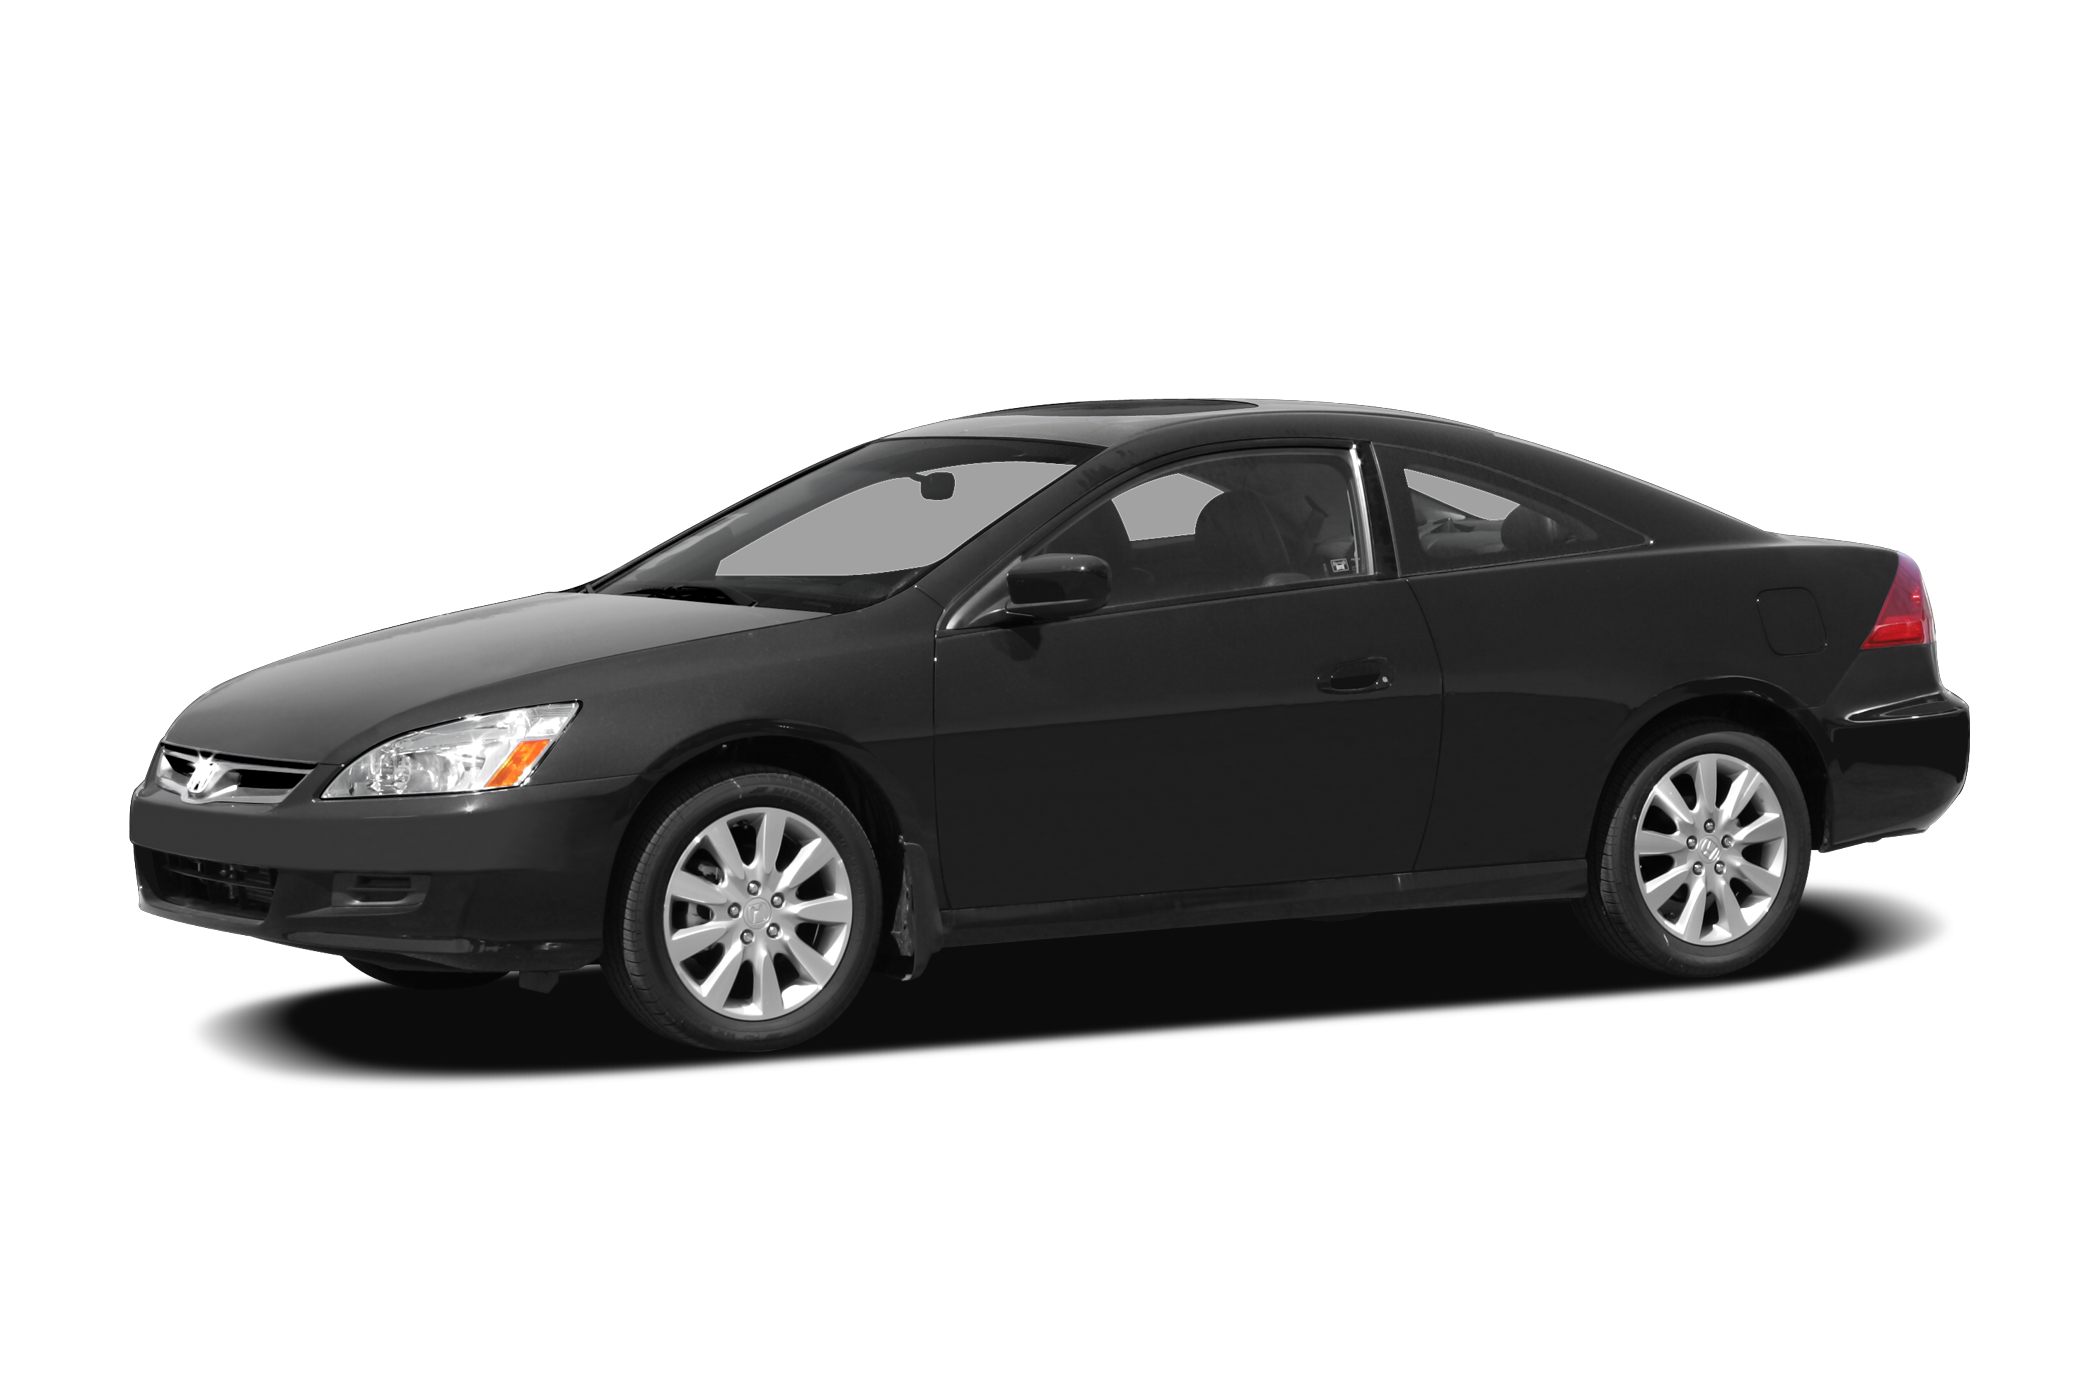 2007 Honda Accord 3 0 Ex 2dr Coupe Pictures